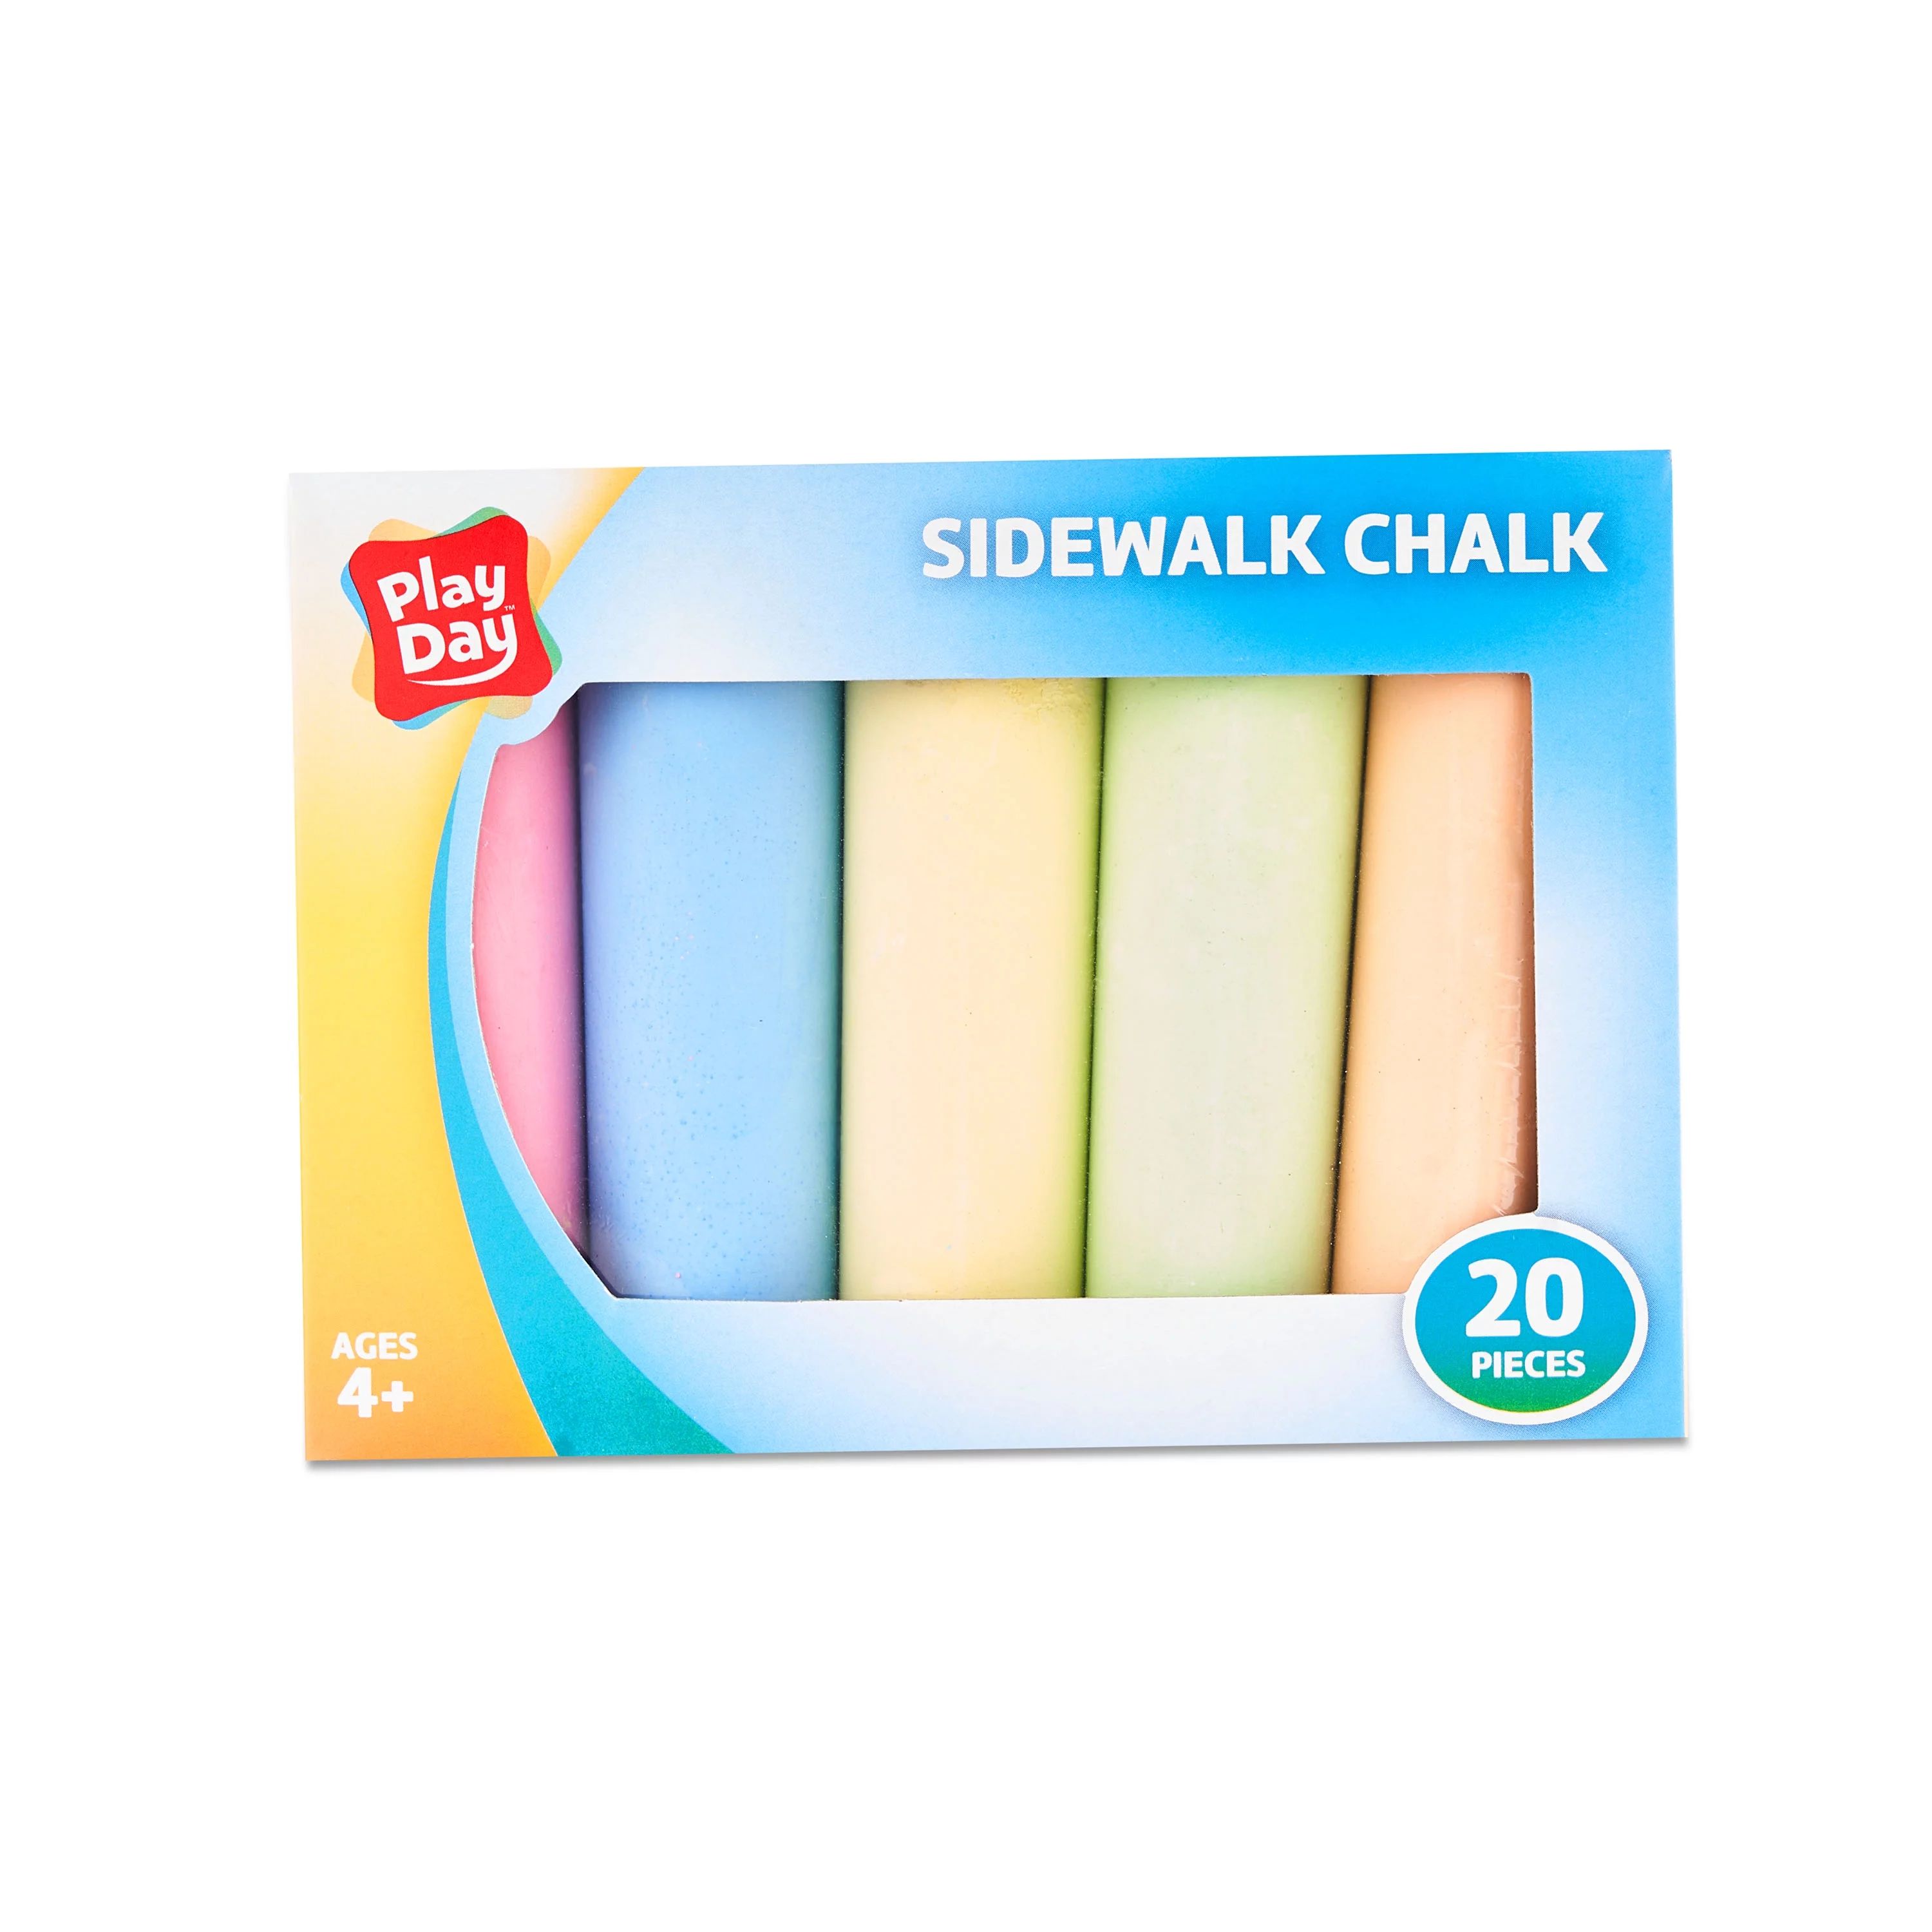 Play Day Sidewalk Chalk, 20 Pieces, Assorted Colors. | Walmart (US)